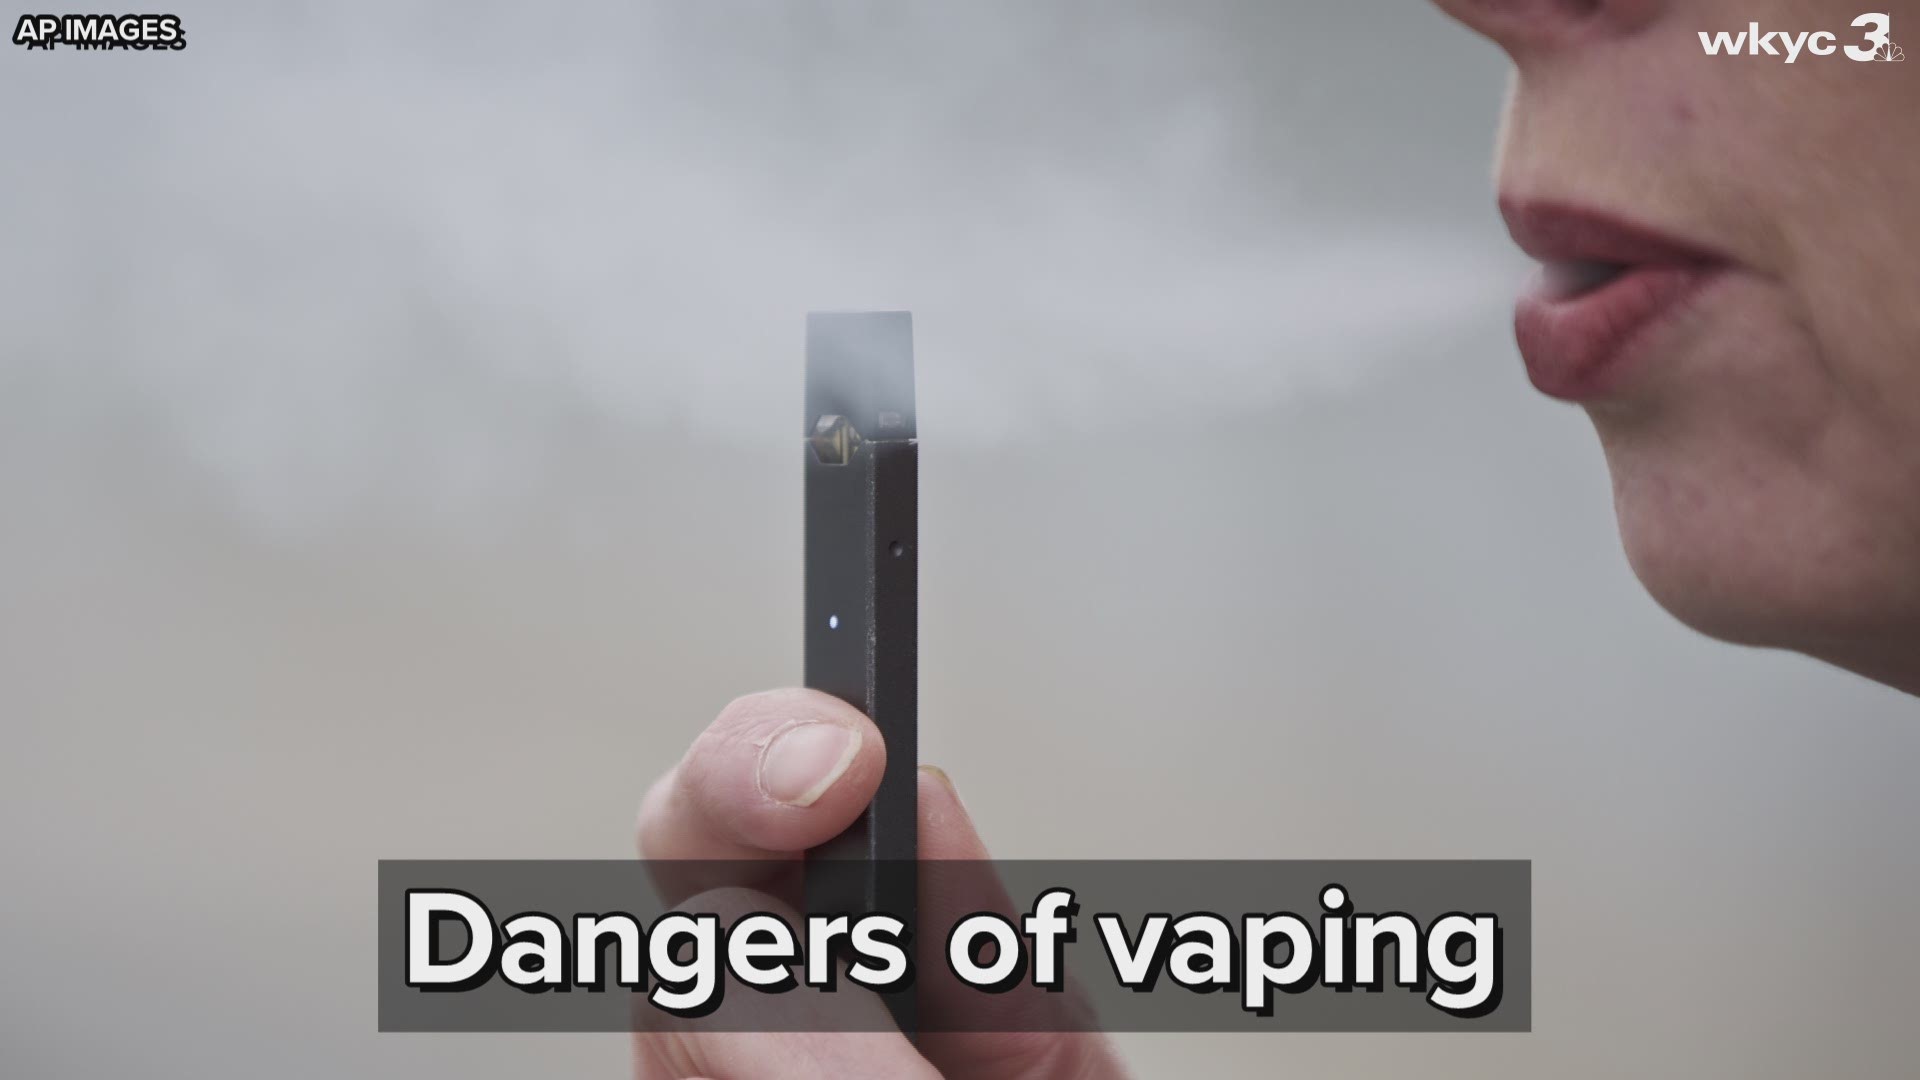 Six Ohioans have experienced severe pulmonary illness following the use of e-cigarettes or vaping. 
'We are seeing a tremendous increase in vaping among our youth, which is a public health crisis.'